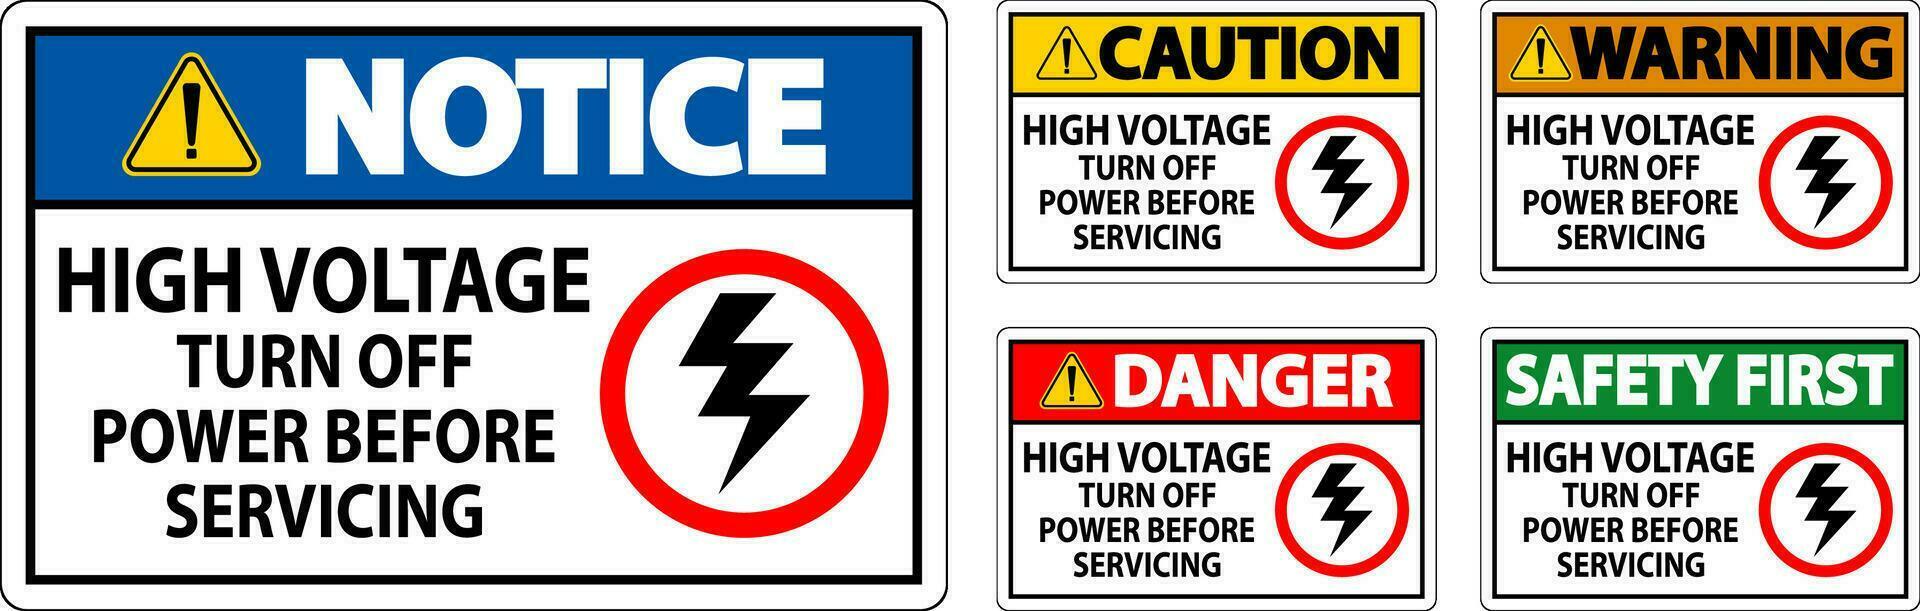 Danger Sign High Voltage - Turn Off Power Before Servicing vector